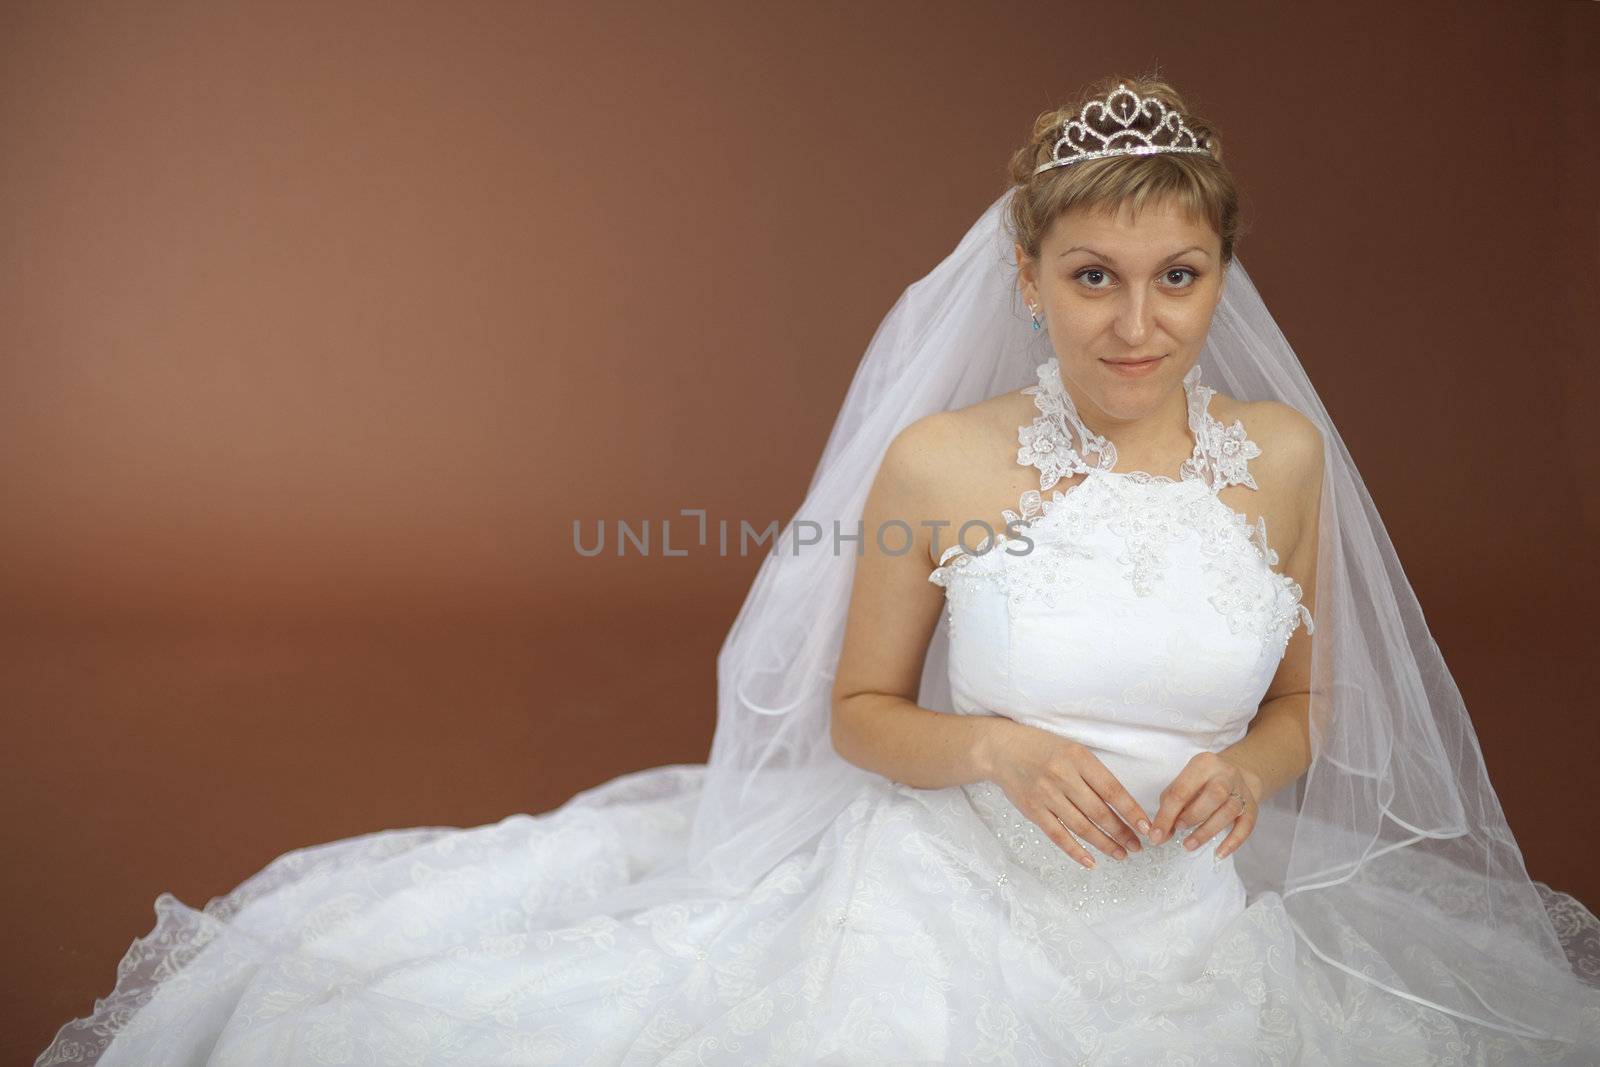 The beautiful amusing bride in a white dress sits on a brown background